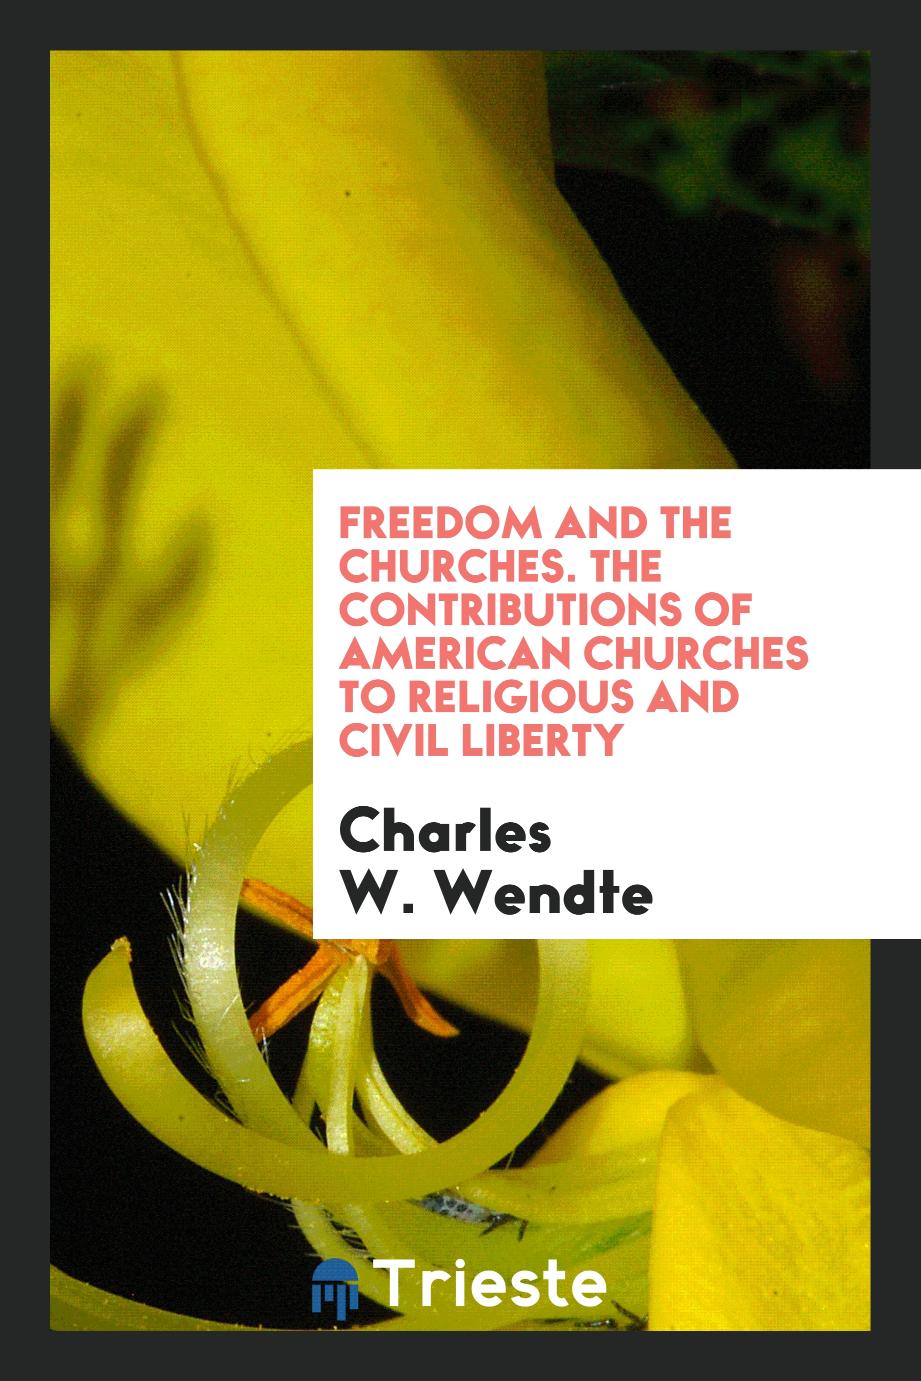 Freedom and the Churches. The Contributions of American Churches to Religious and Civil Liberty